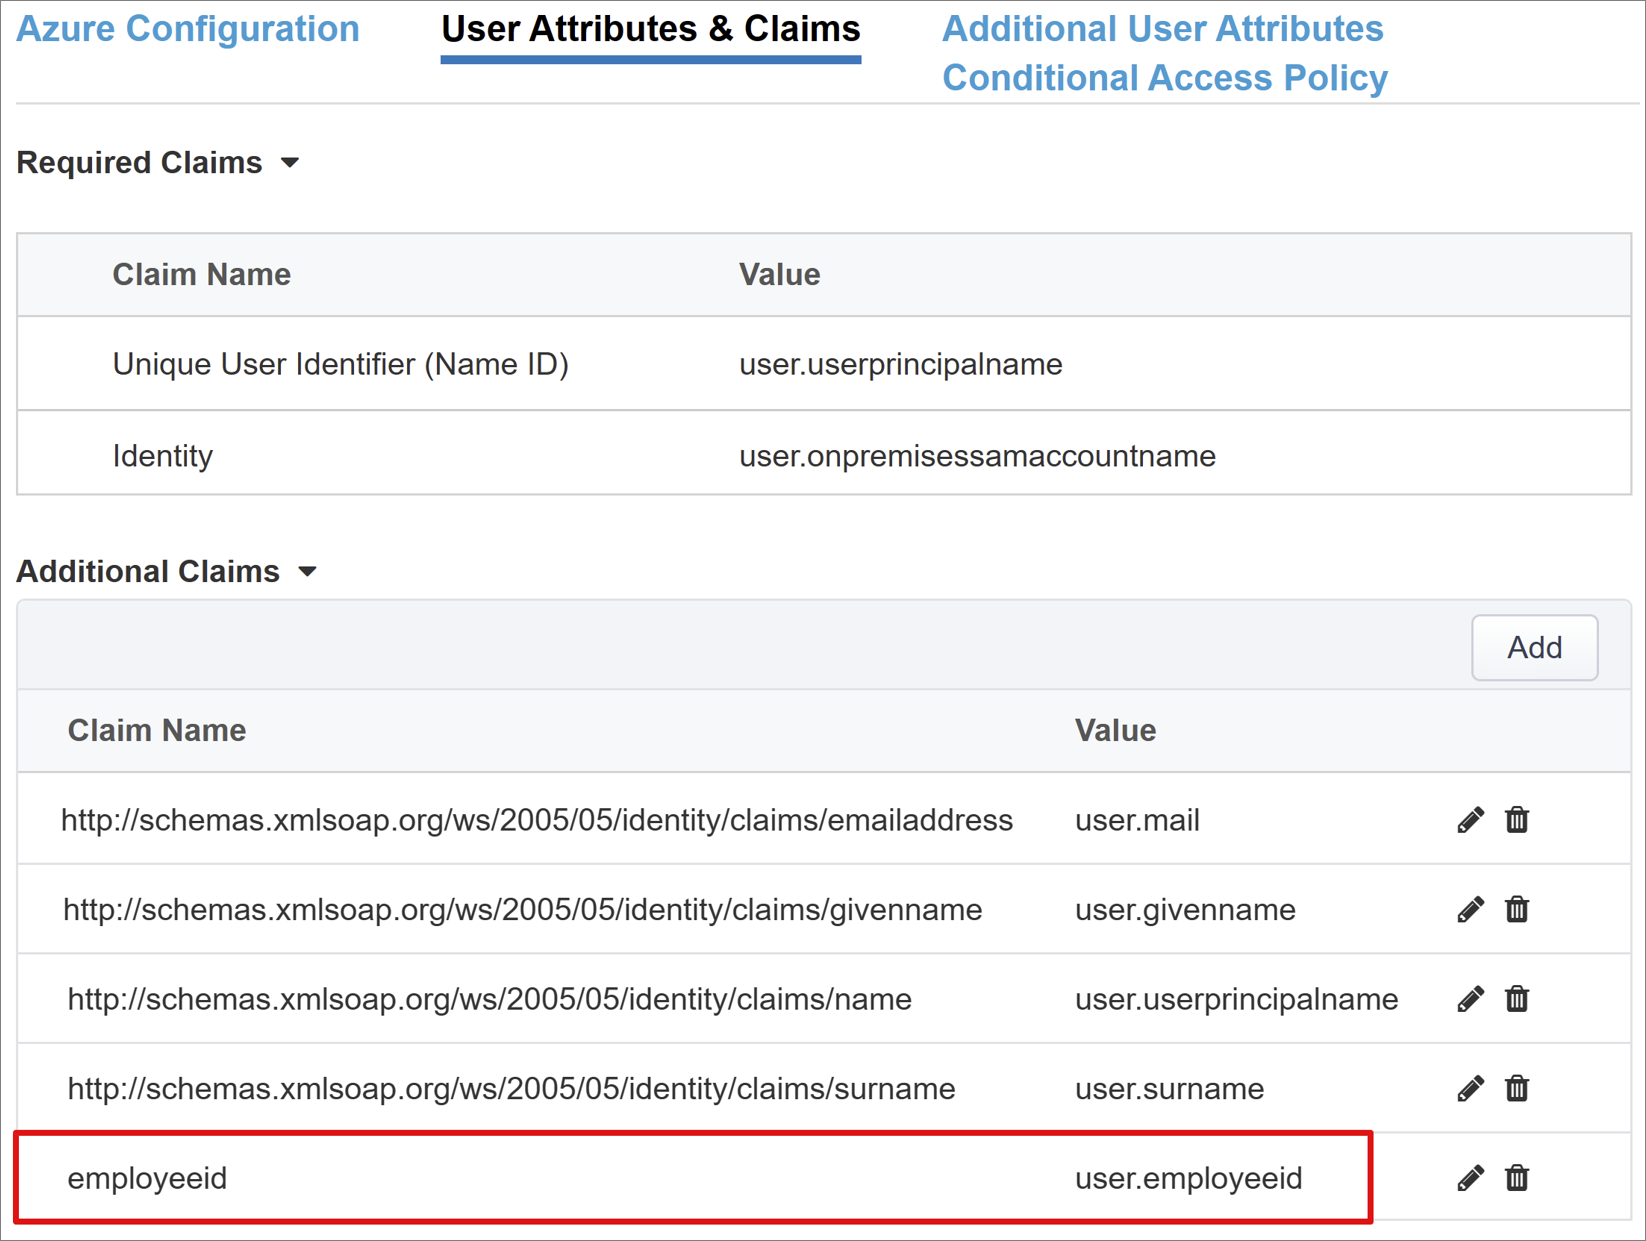 Screenshot of the employeeid value under Additional Claims, on User Attributes and Claims.